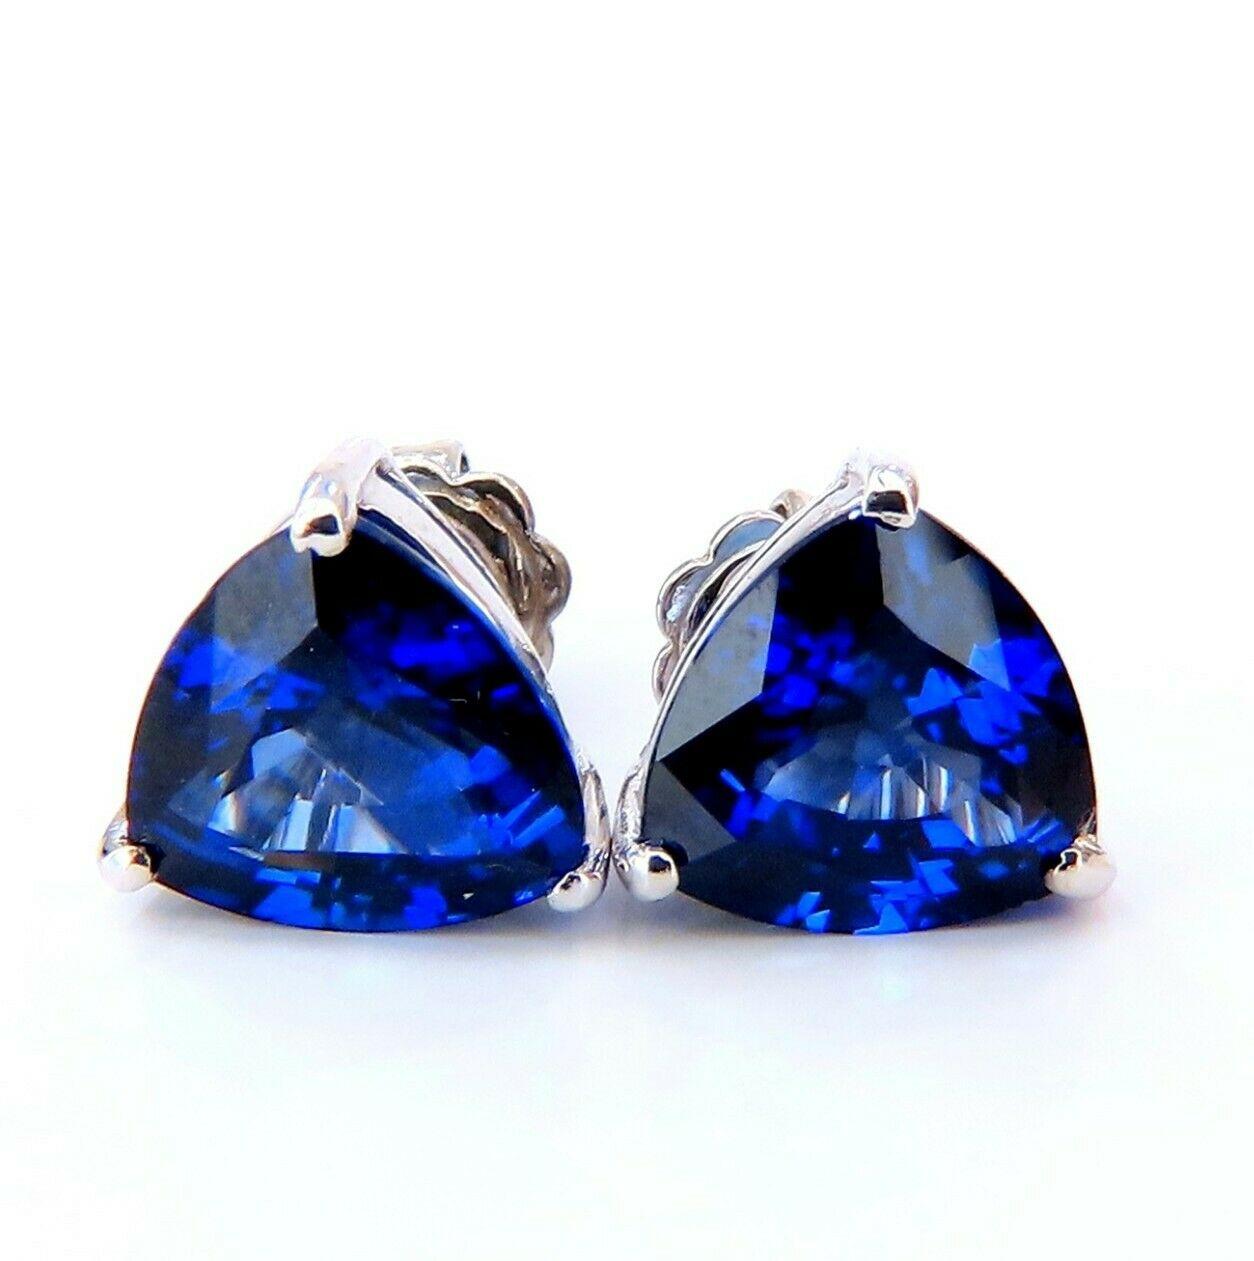 Royal blue triangular stud earrings

9.11 carat Lab created Trilliant cut sapphires.

Royal blue, clean clarity and transparent.

10.7 x 9.2 mm each.

Depth of earrings: 6.5 mm

14kt white gold 4.4 grams.